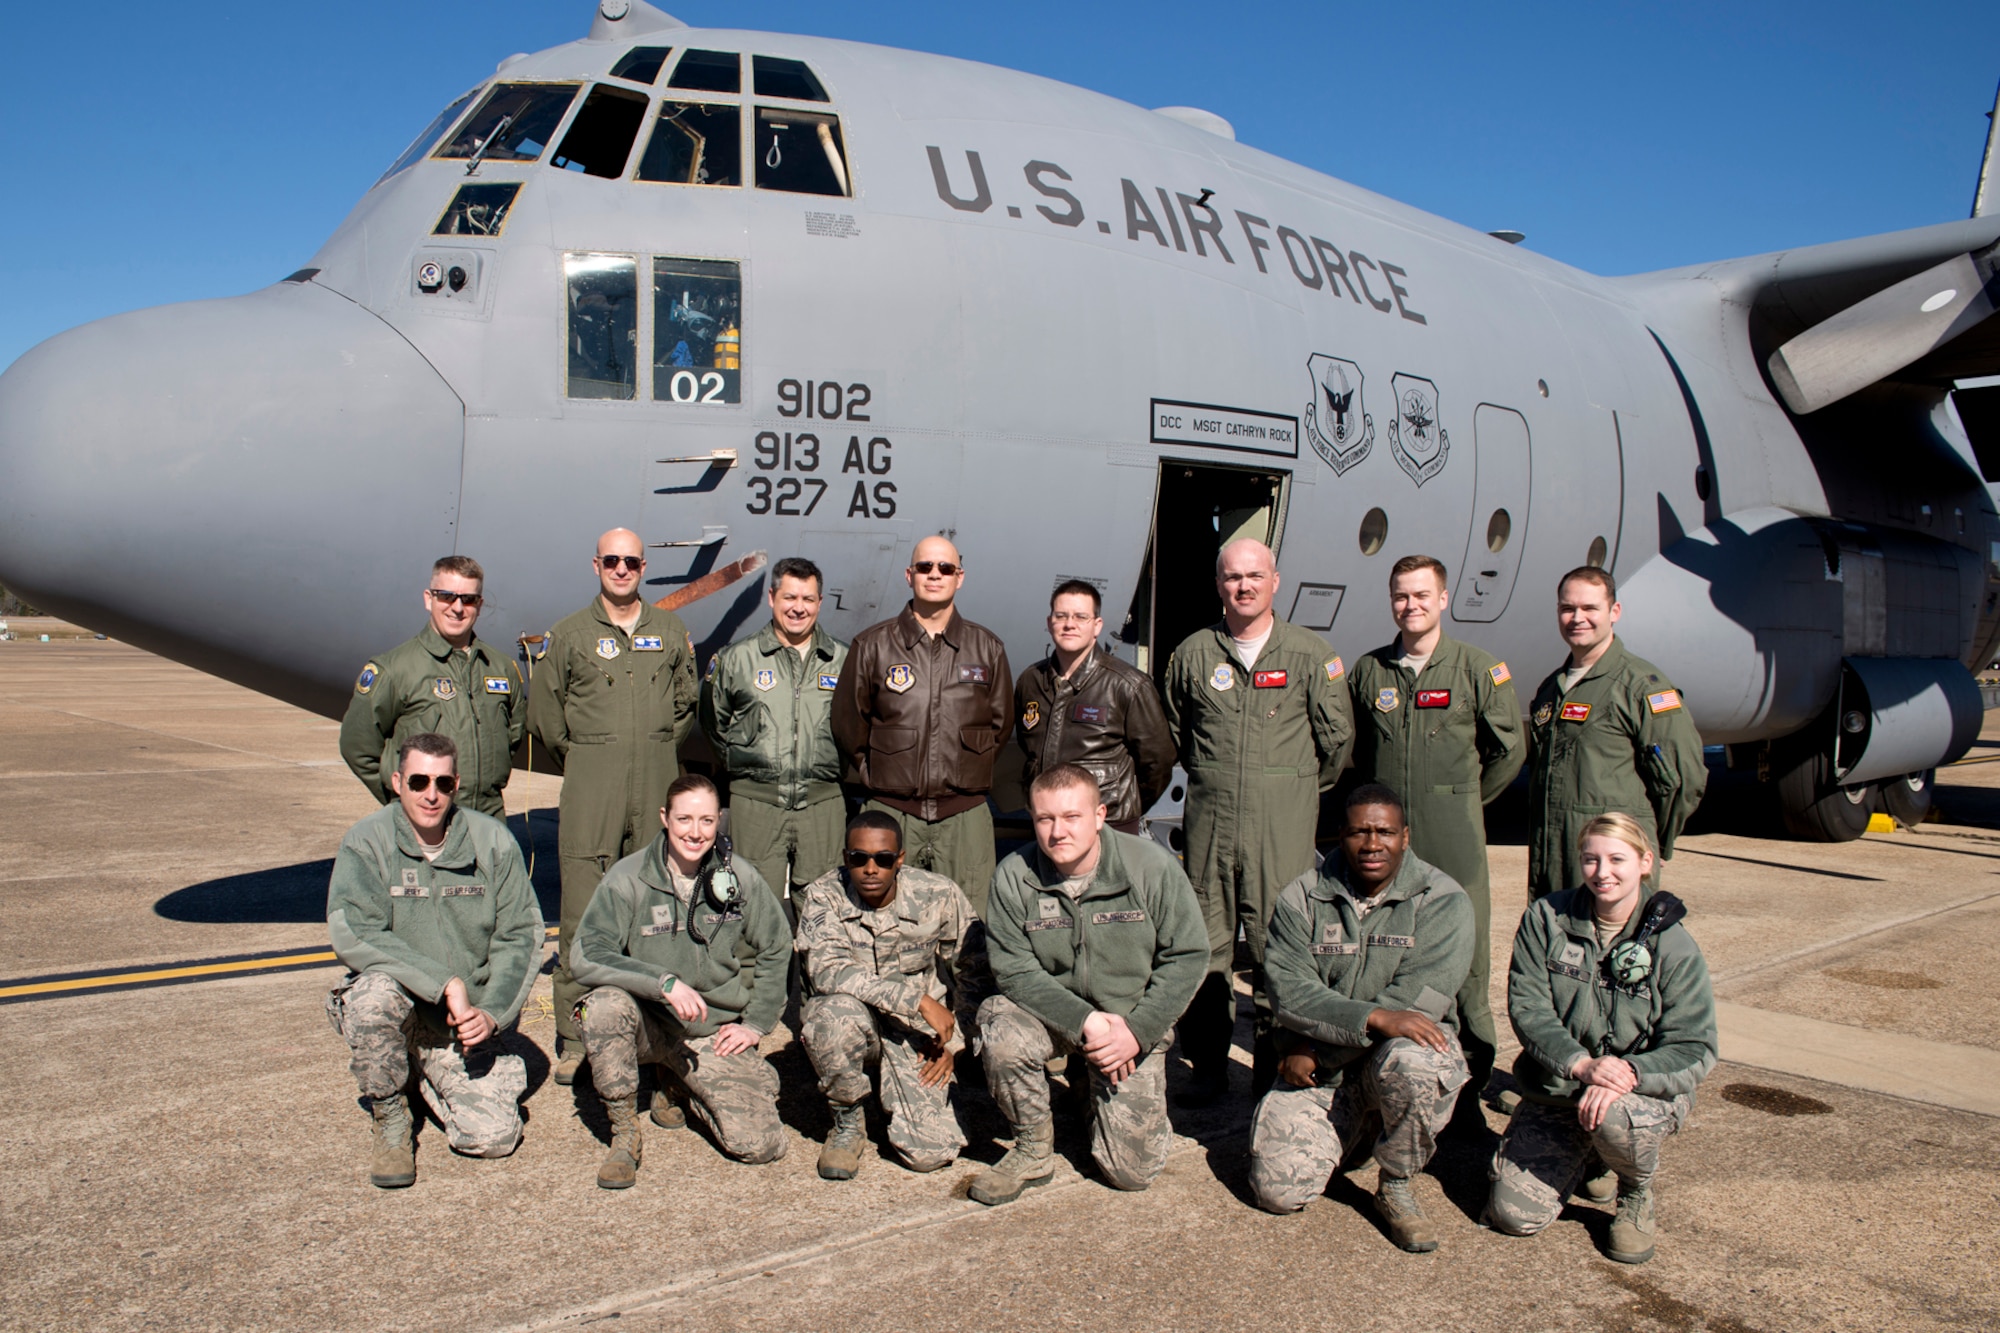 U.S. Air Force aircrew members and passengers of the last training mission flight in a C-130H for the 913th Airlift Group, pose for a photo after the flight at Little Rock Air Force Base, Ark., Jan. 28, 2016. (Standing L-R) U.S. Air Force Master Sgt. Dave Hemphill, flight engineer, Senior Master Sgt. Duane Moore, flight engineer, Lt. Col. James Trevino, navigator, Lt. Col. Neil Hede, pilot, Tech. Sgt. Derek Johnson, loadmaster, Master Sgt. James Cope, loadmaster, Senior Airman Cody Greathouse, loadmaster, and Lt. Col. Keith Jasmin, pilot, (Kneeling L-R) Master Sgt. Geoff Begey, expeditor, Senior Airman Jennifer Franke, crew chief, Senior Airman Kquamae Akins, crew chief, Senior Airman Dawton McGaugh, crew chief, Staff Sgt. Bryan Cheeks, engine mechanic and Senior Airman Ariel Geldien, electronic environmental technician. (U.S. Air Force photo by Master Sgt. Jeff Walston/Released)